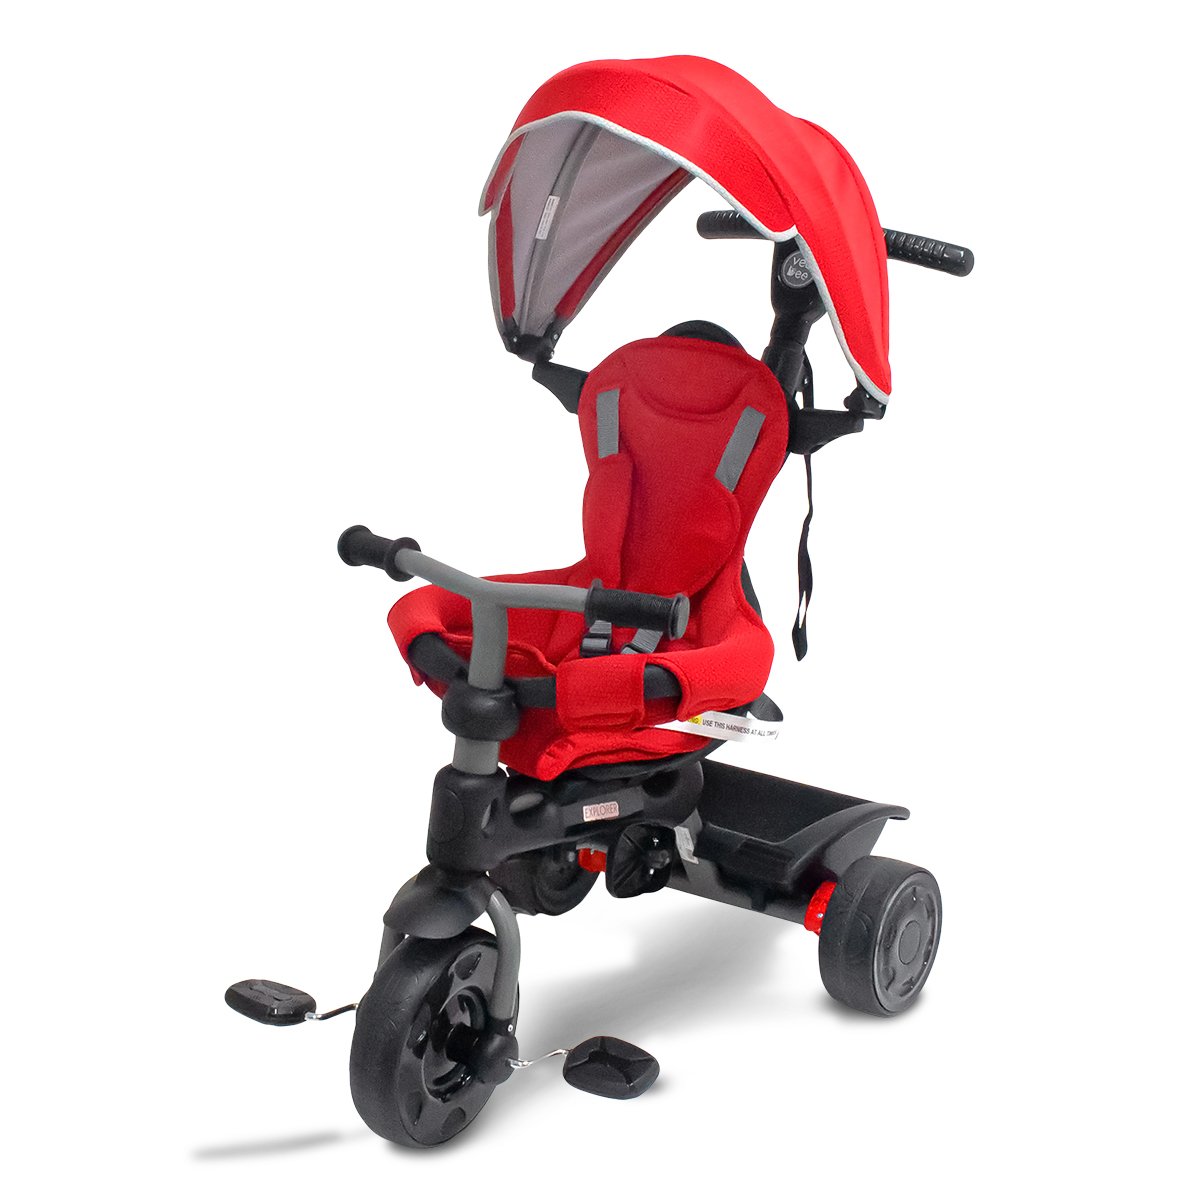 Veebee Explorer 3-Stage Kids Trike with Canopy - Red 2